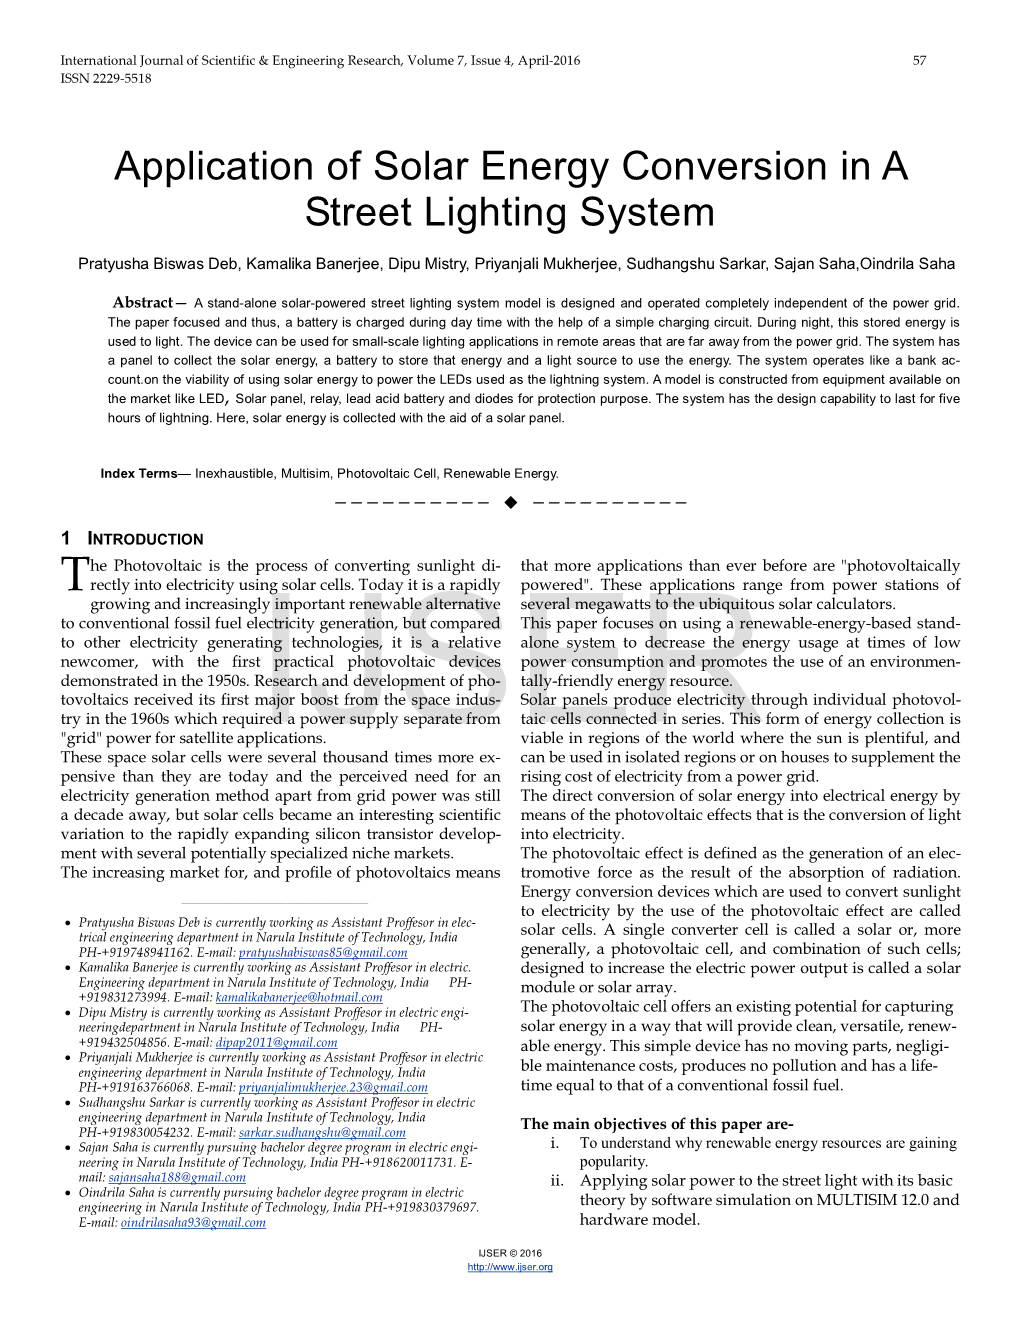 Application of Solar Energy Conversion in a Street Lighting System